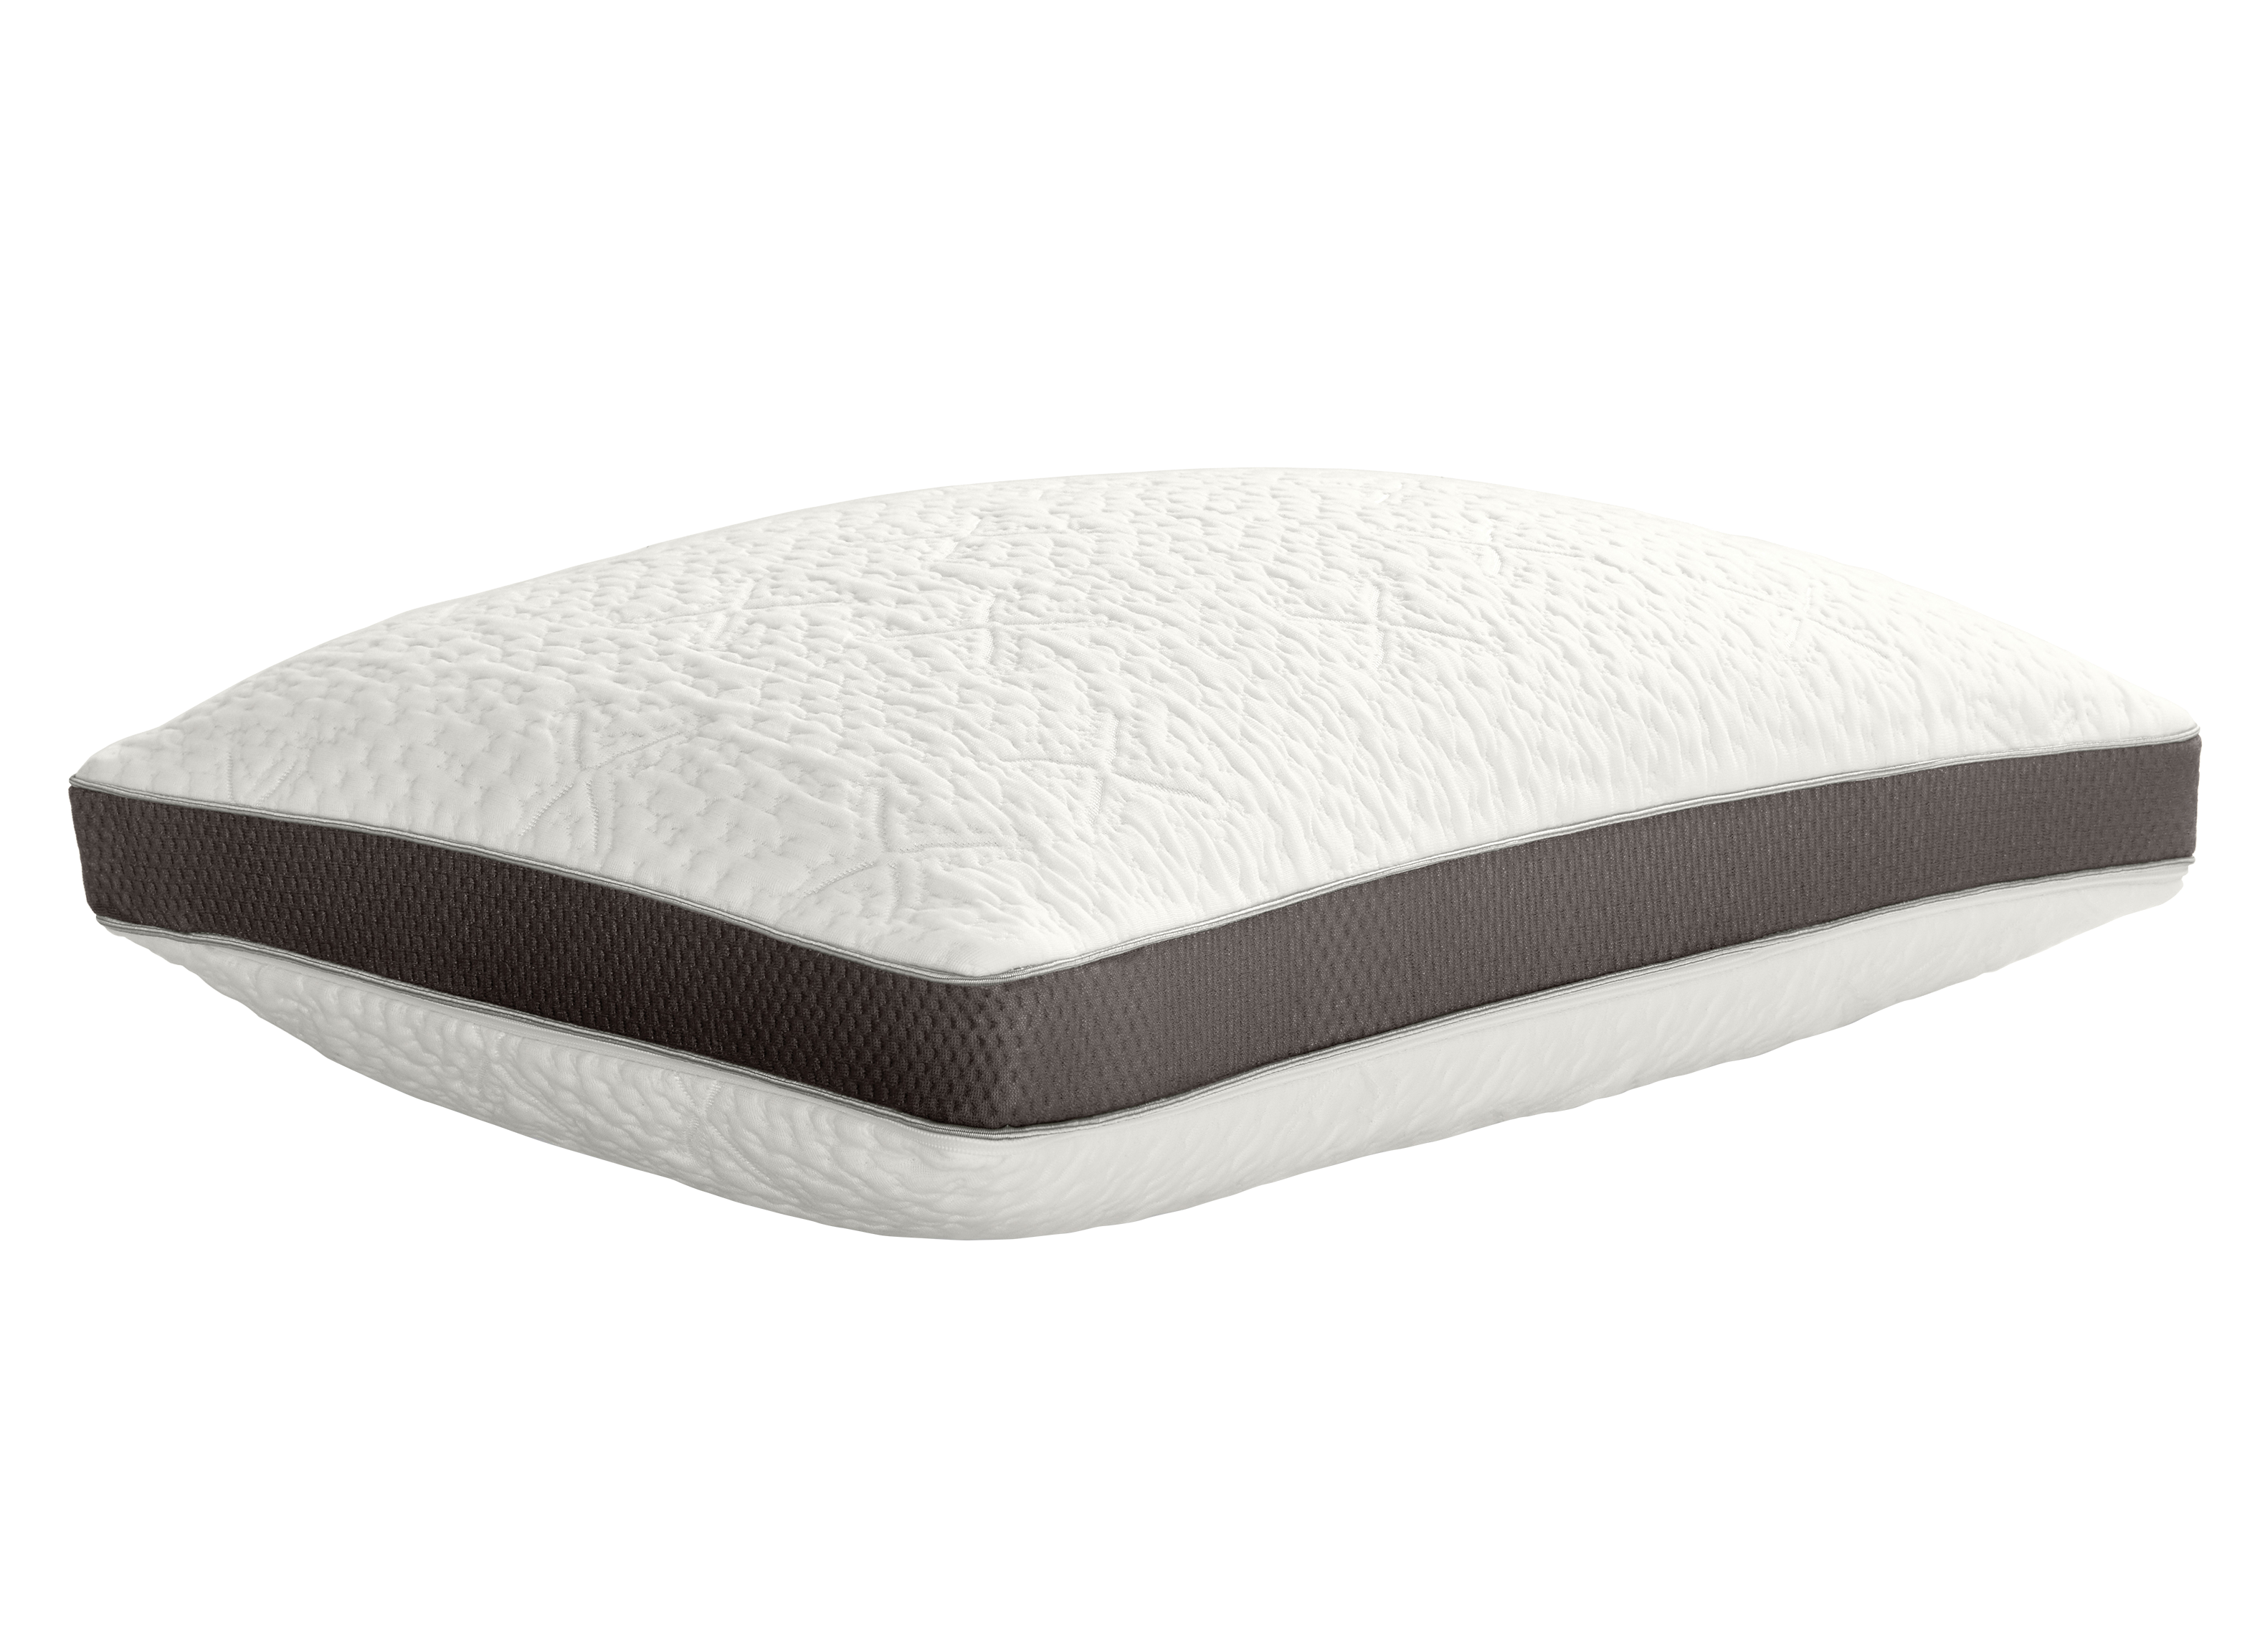 https://crdms.images.consumerreports.org/prod/products/cr/models/401818-pillows-sleep-number-comfortfit-ultimate-10014686.png